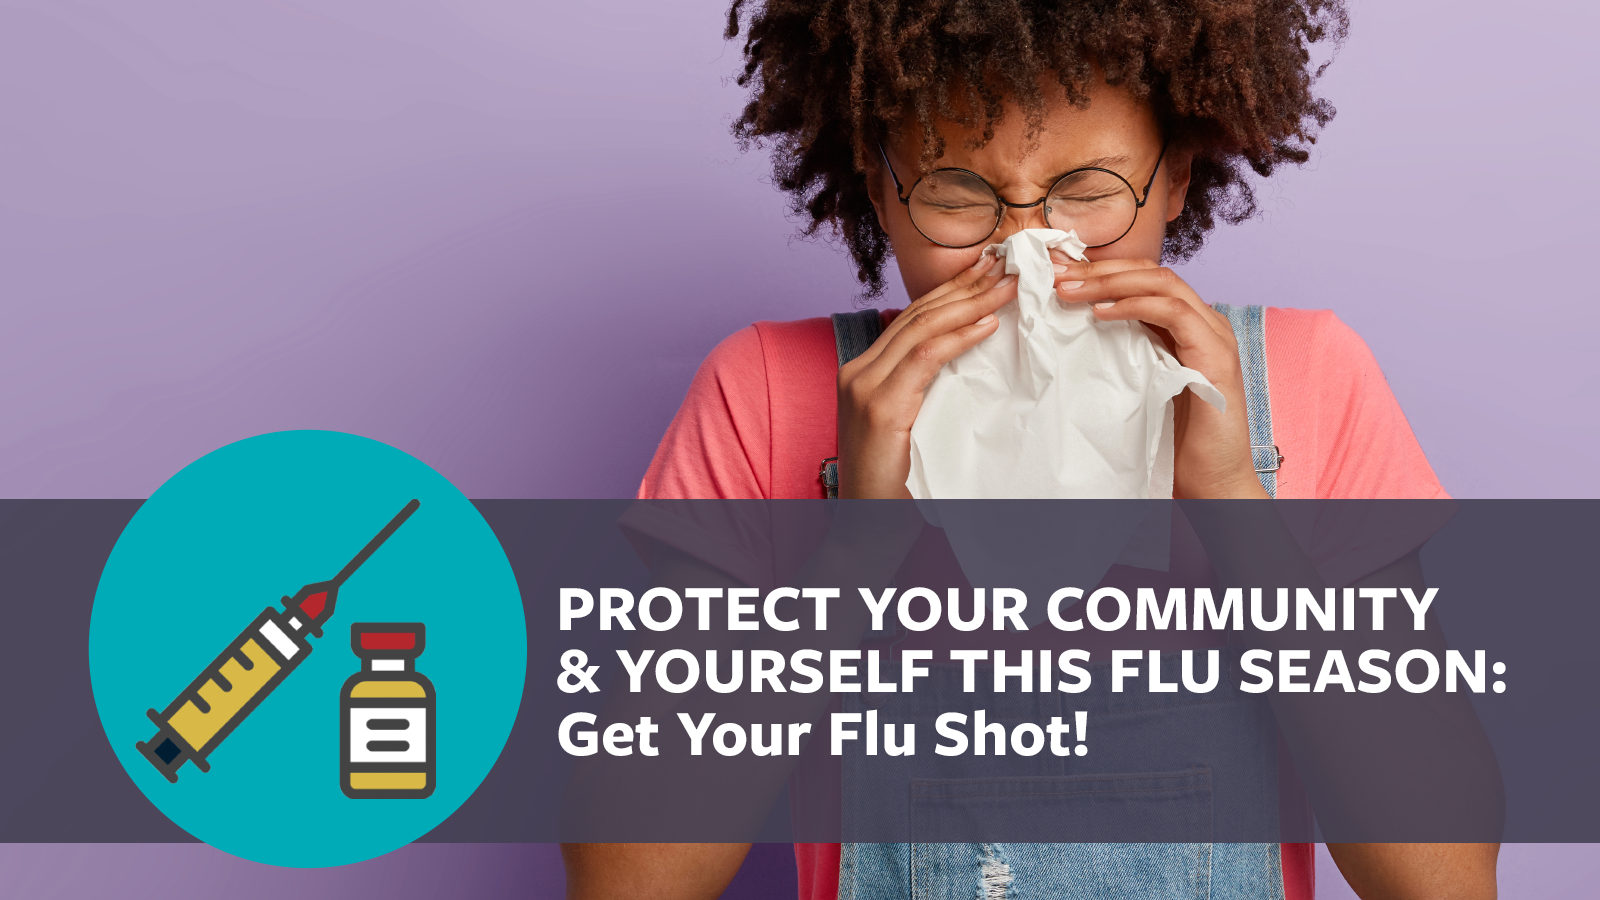 Protect your community and yourself this flu season. Get your flu shot!